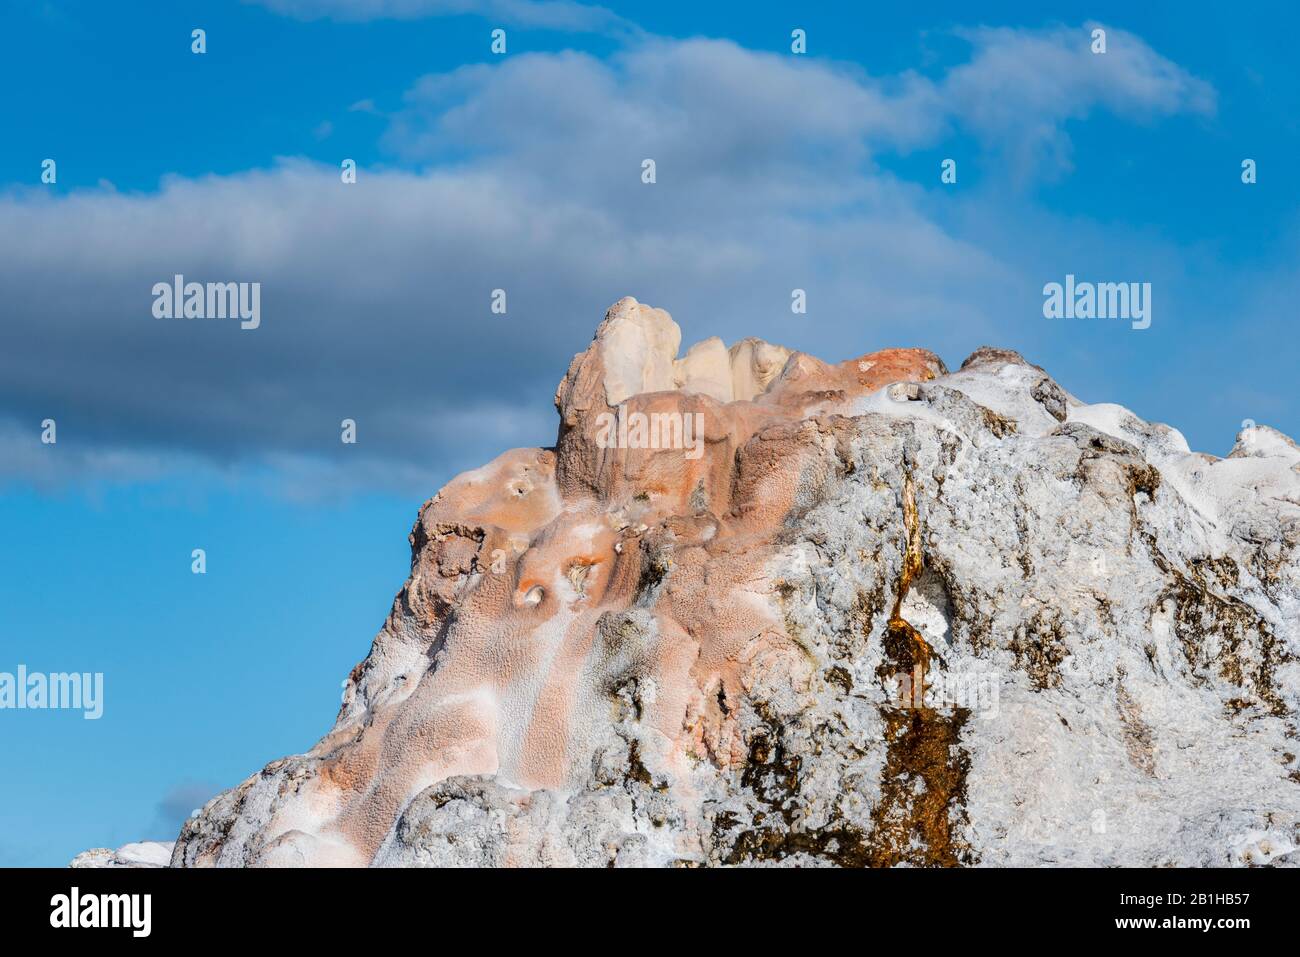 Closeup of the top of a geyser against a blue sky with white clouds. Stock Photo